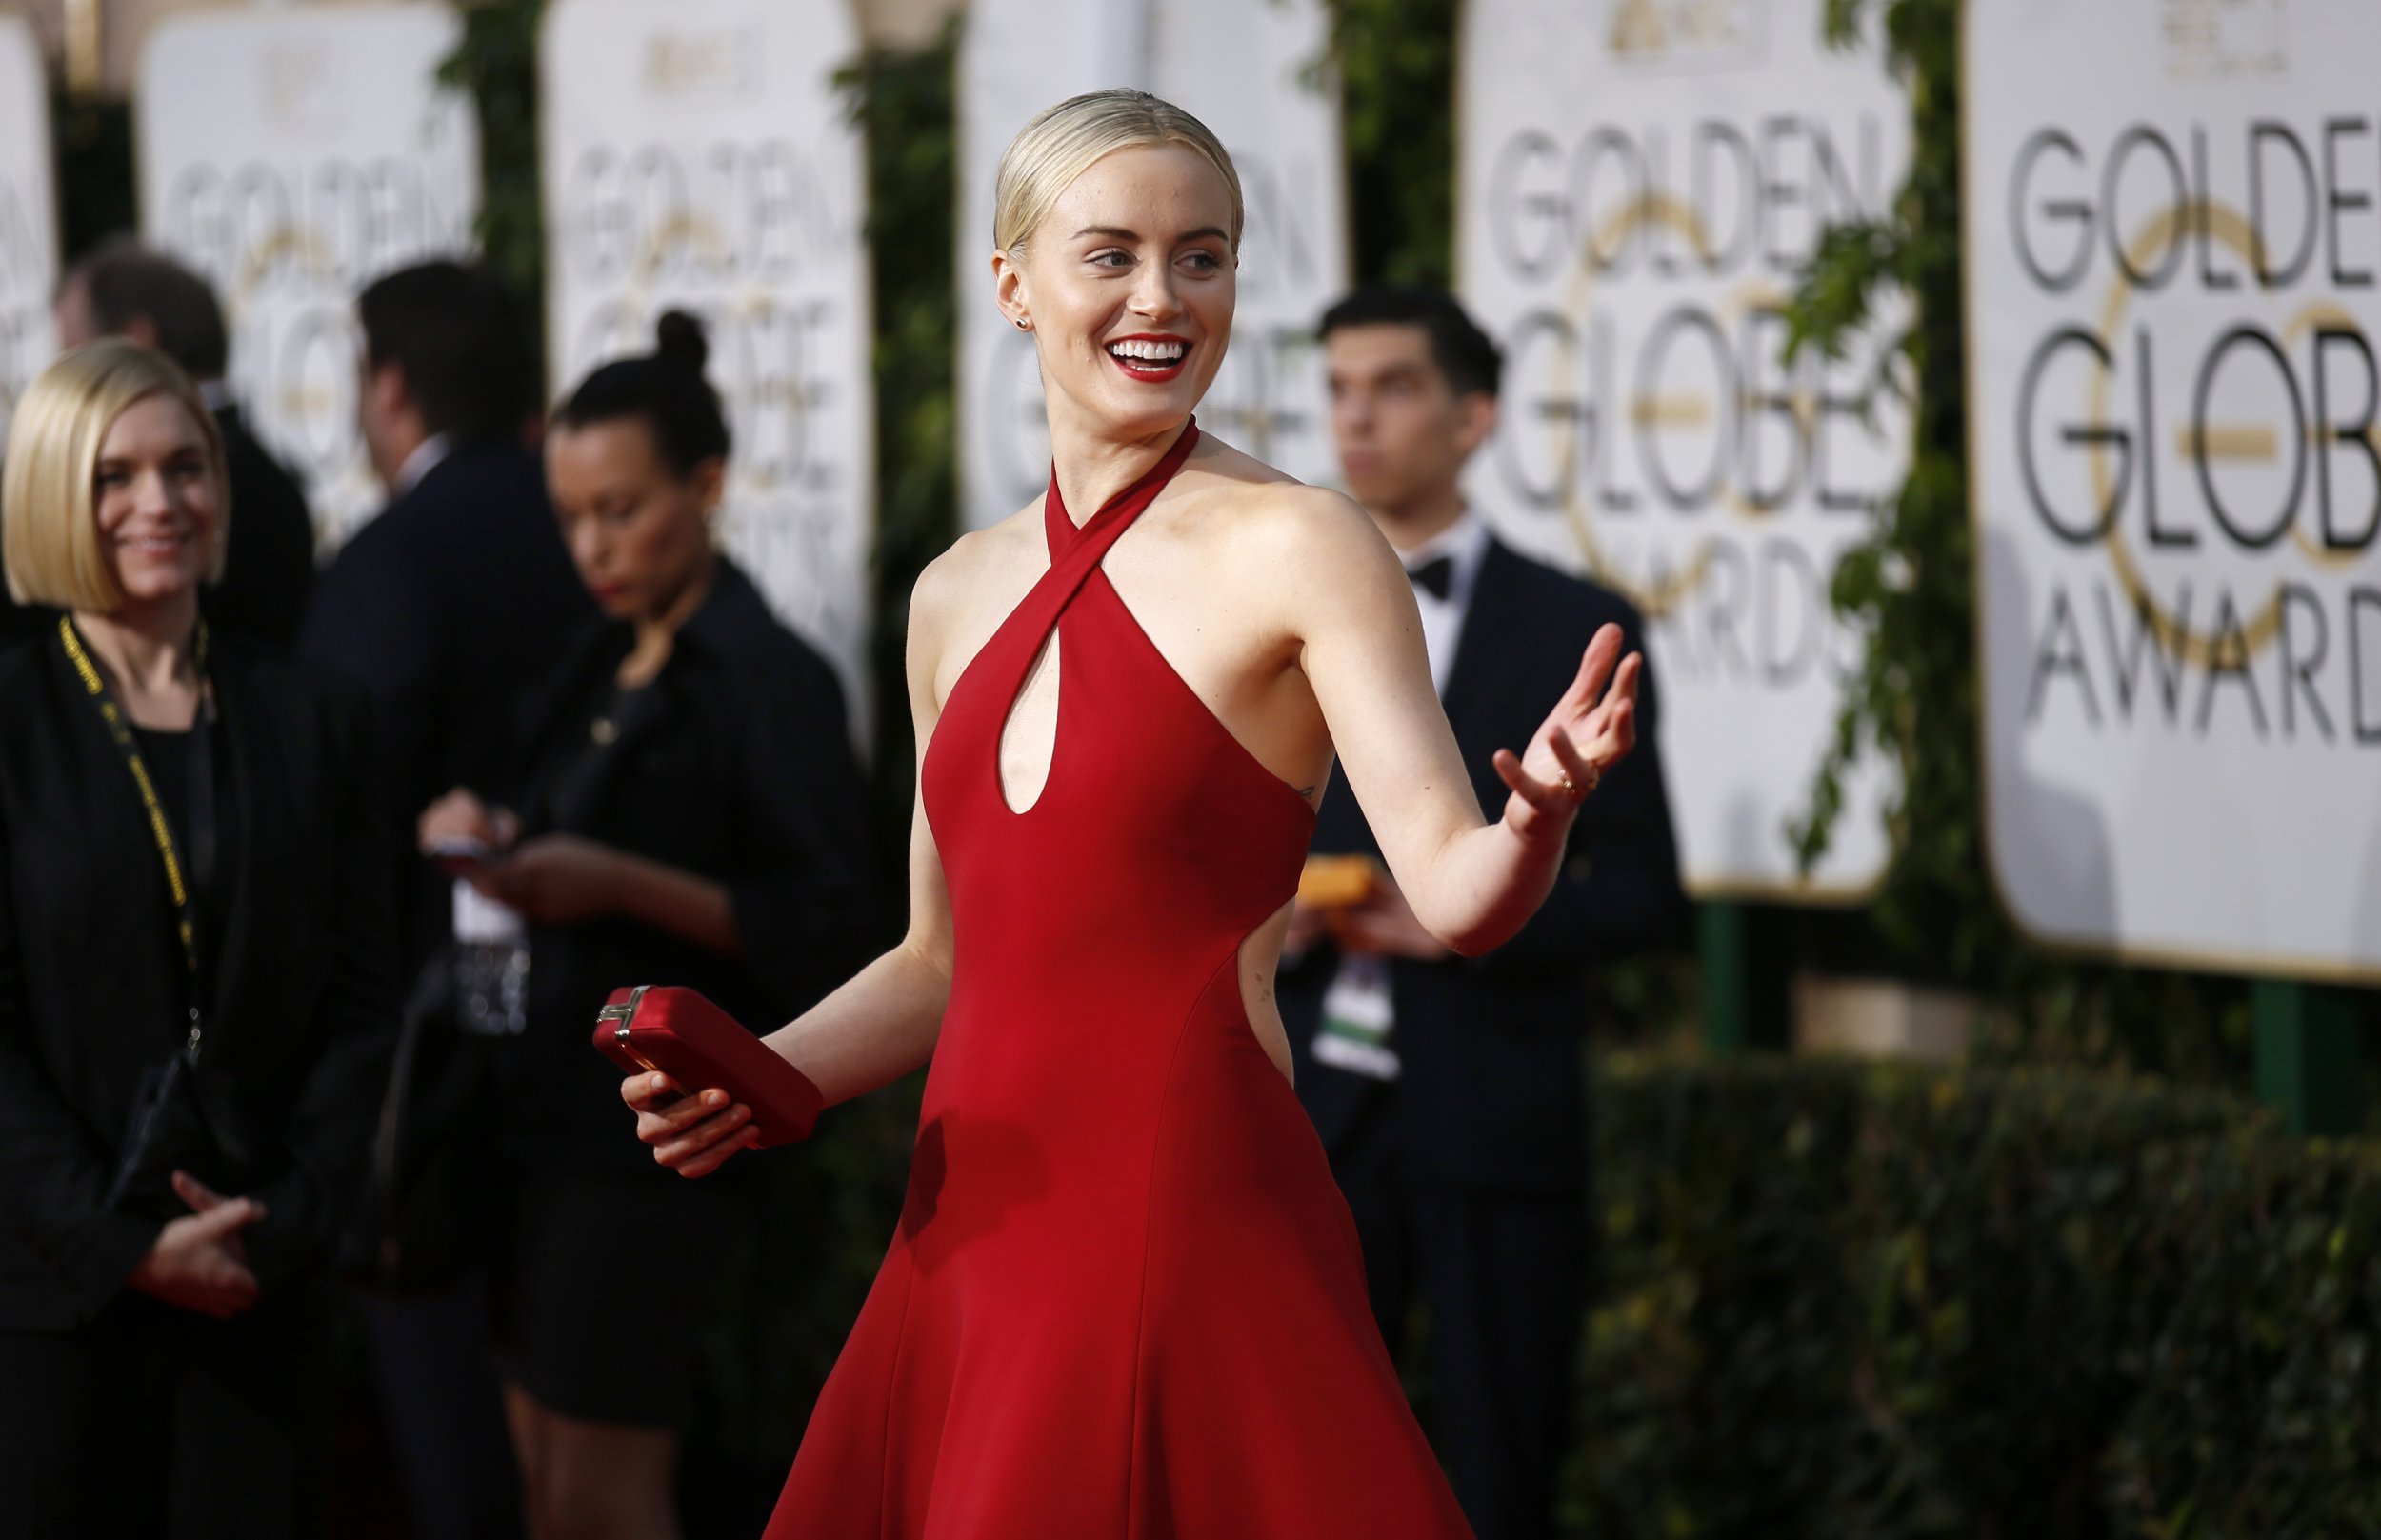 bryan mulvihill recommends Taylor Schilling Naked